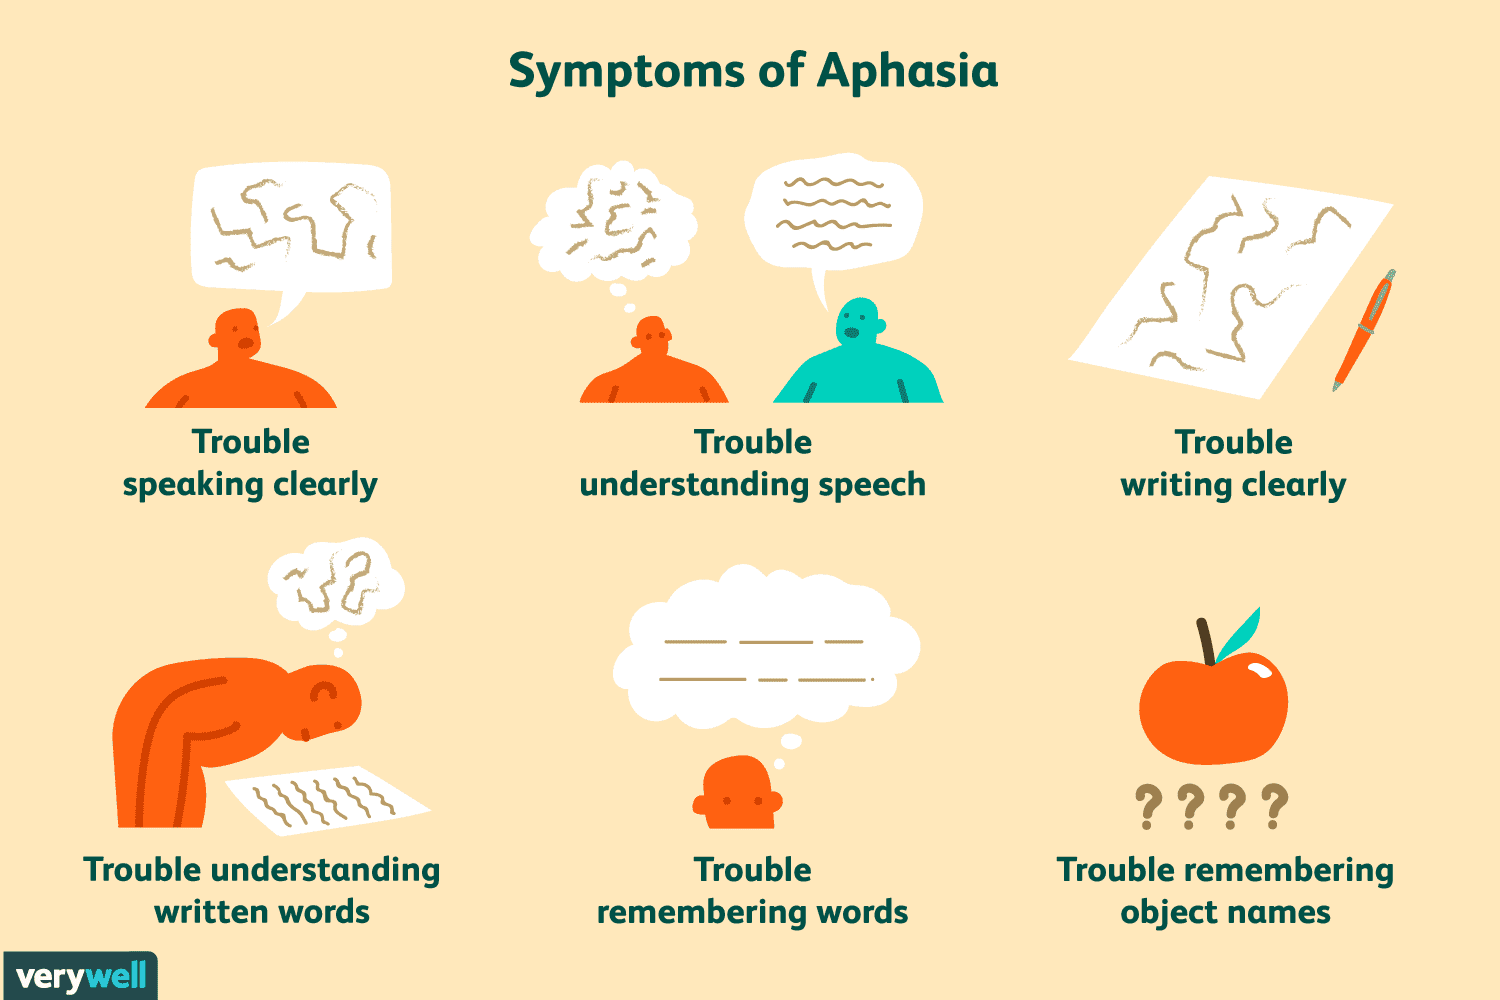 What are the symptoms of aphasia?